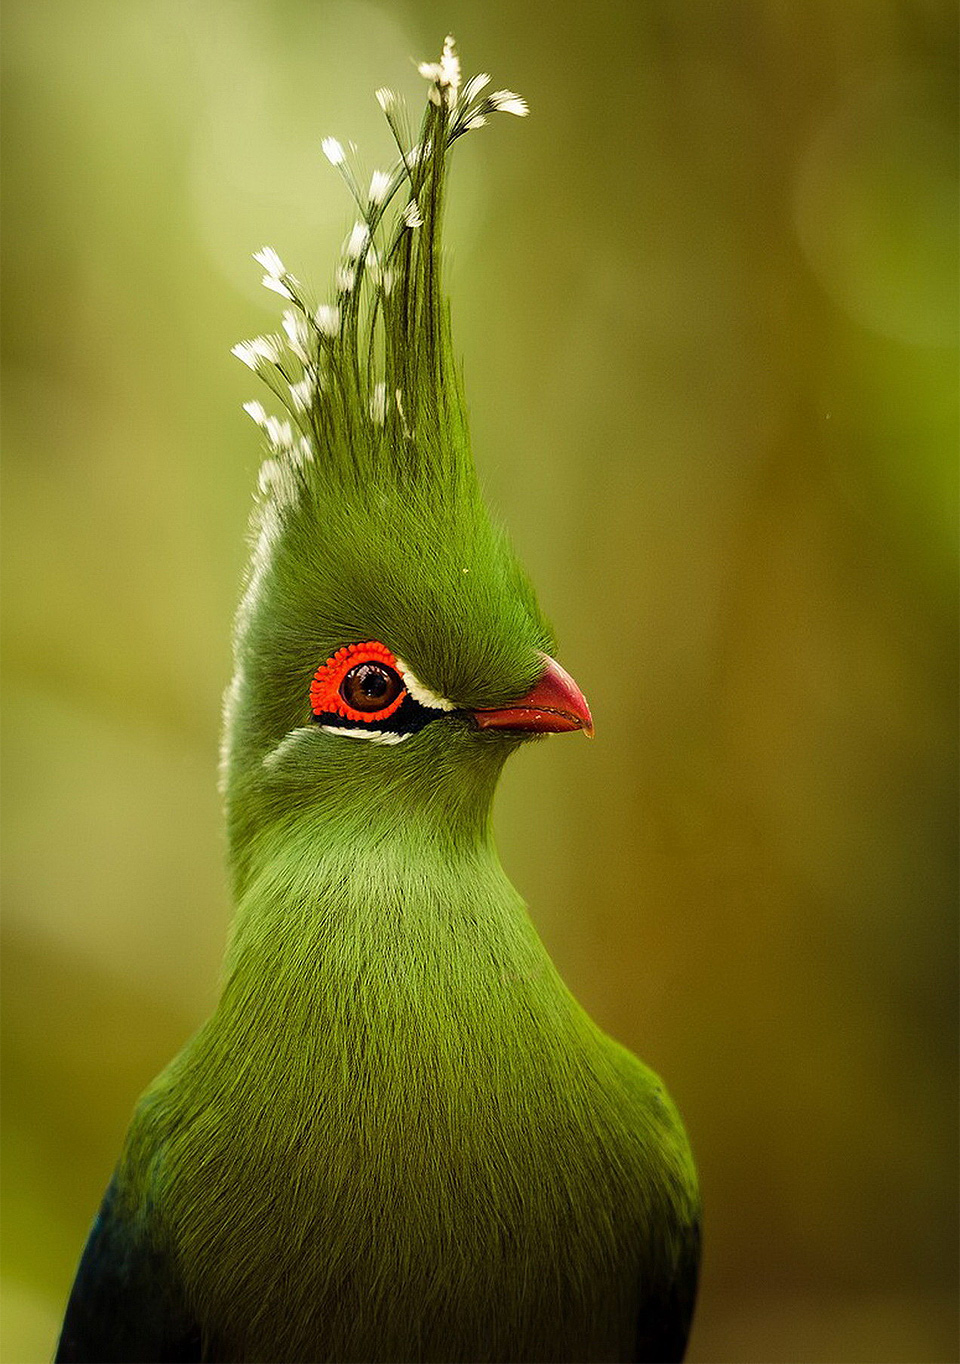 The Bird With Majestic “Hair Style”